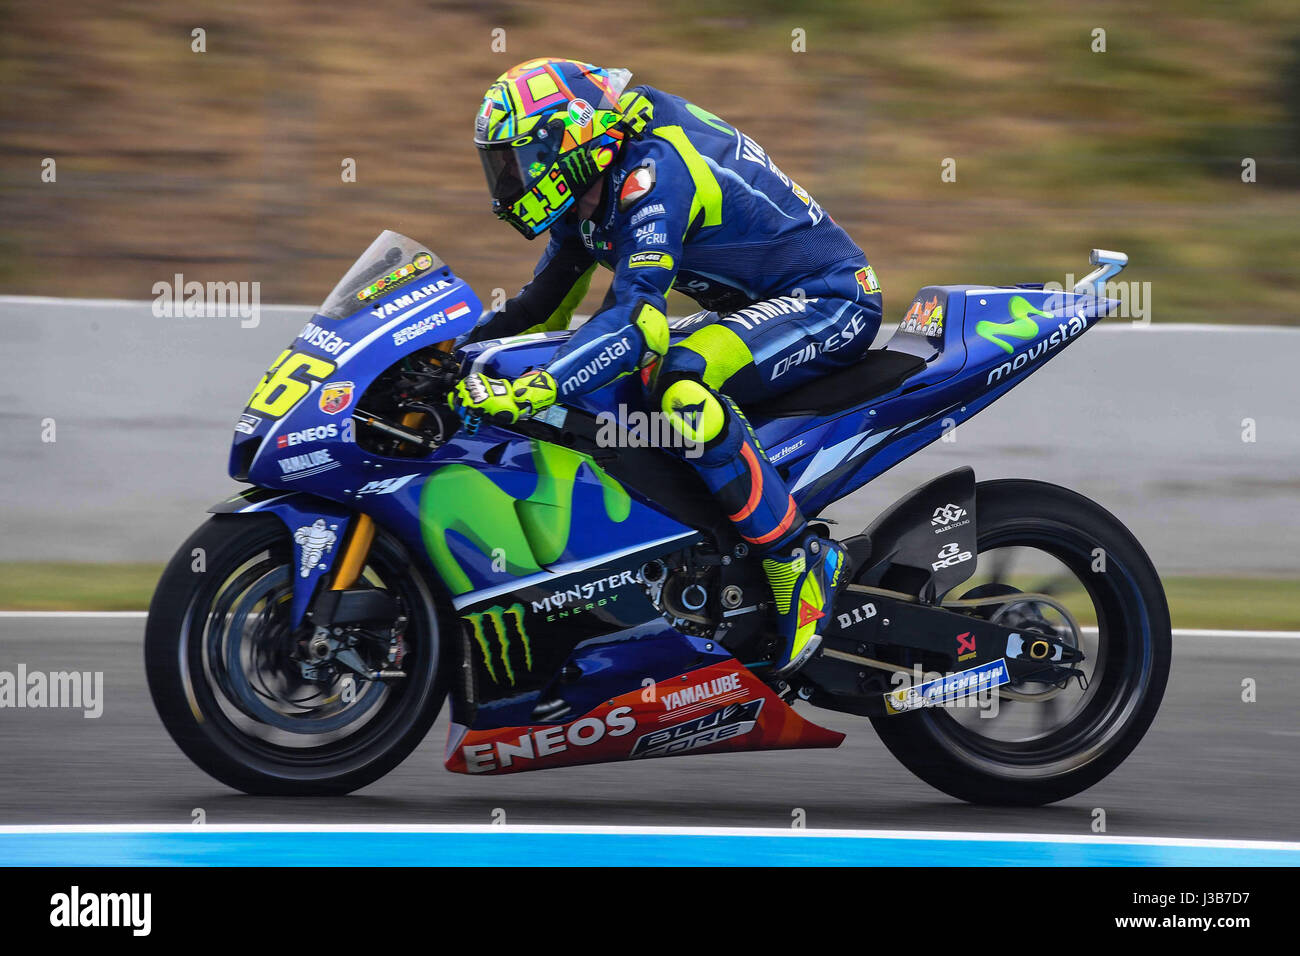 Jerez de la Frontera, Spain. 5th May, 2017. Valentino Rossi of Italy and  Movistar Yamaha MotoGP rides during the MotoGp of Spain - Free Practice at  Circuito de Jerez on May 5,